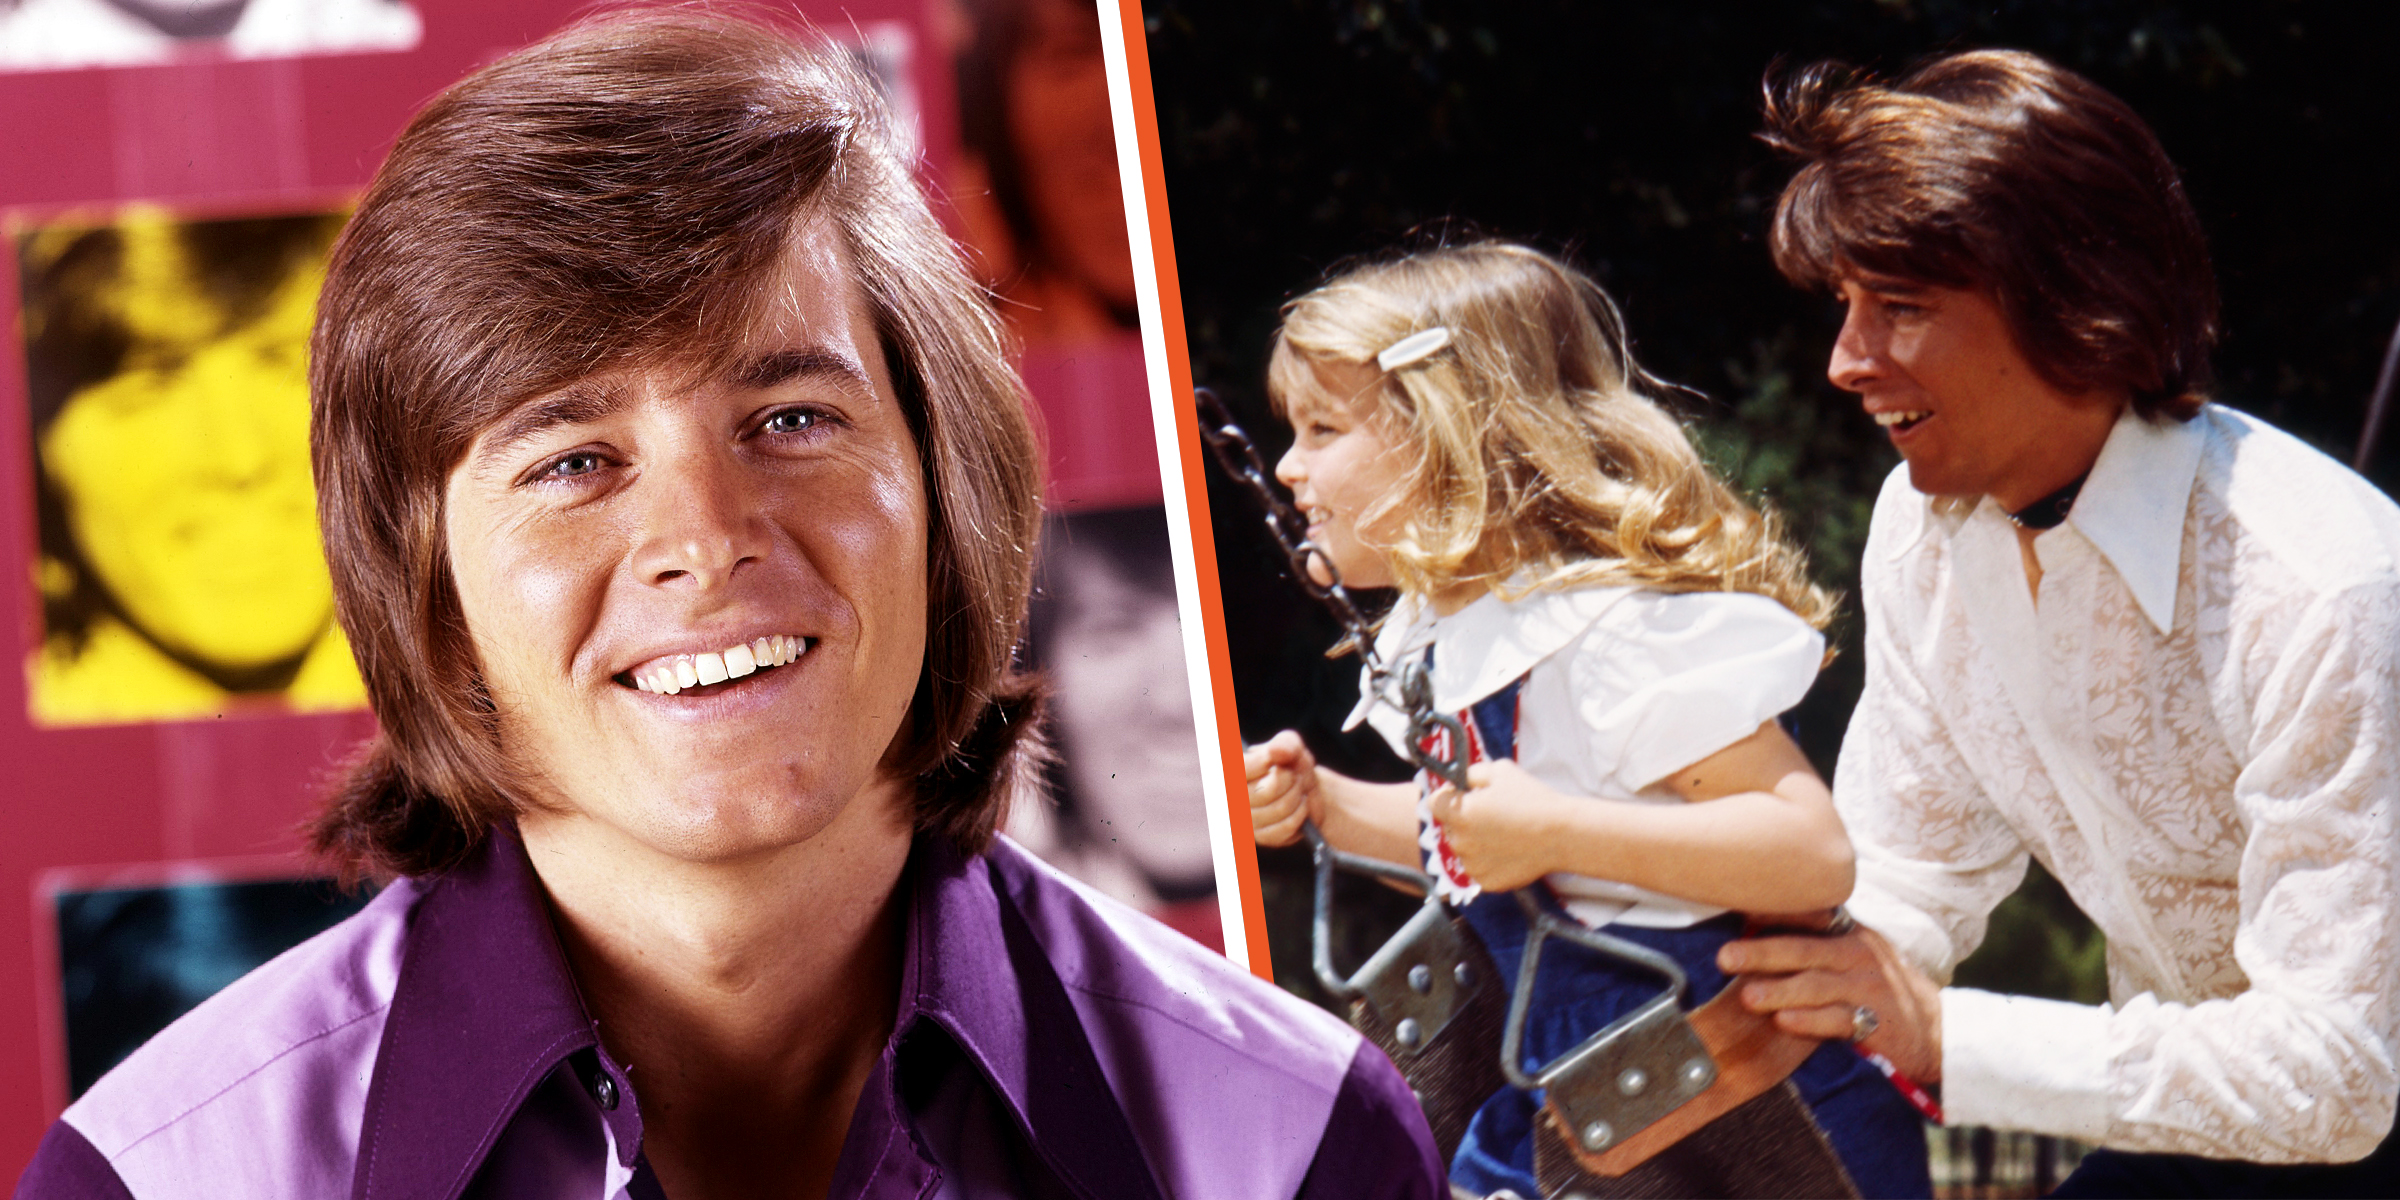 Bobby Sherman, 1971 | Bobby Sherman Pushing a Young Girl on a Swing, 1970 | Source: Getty Images